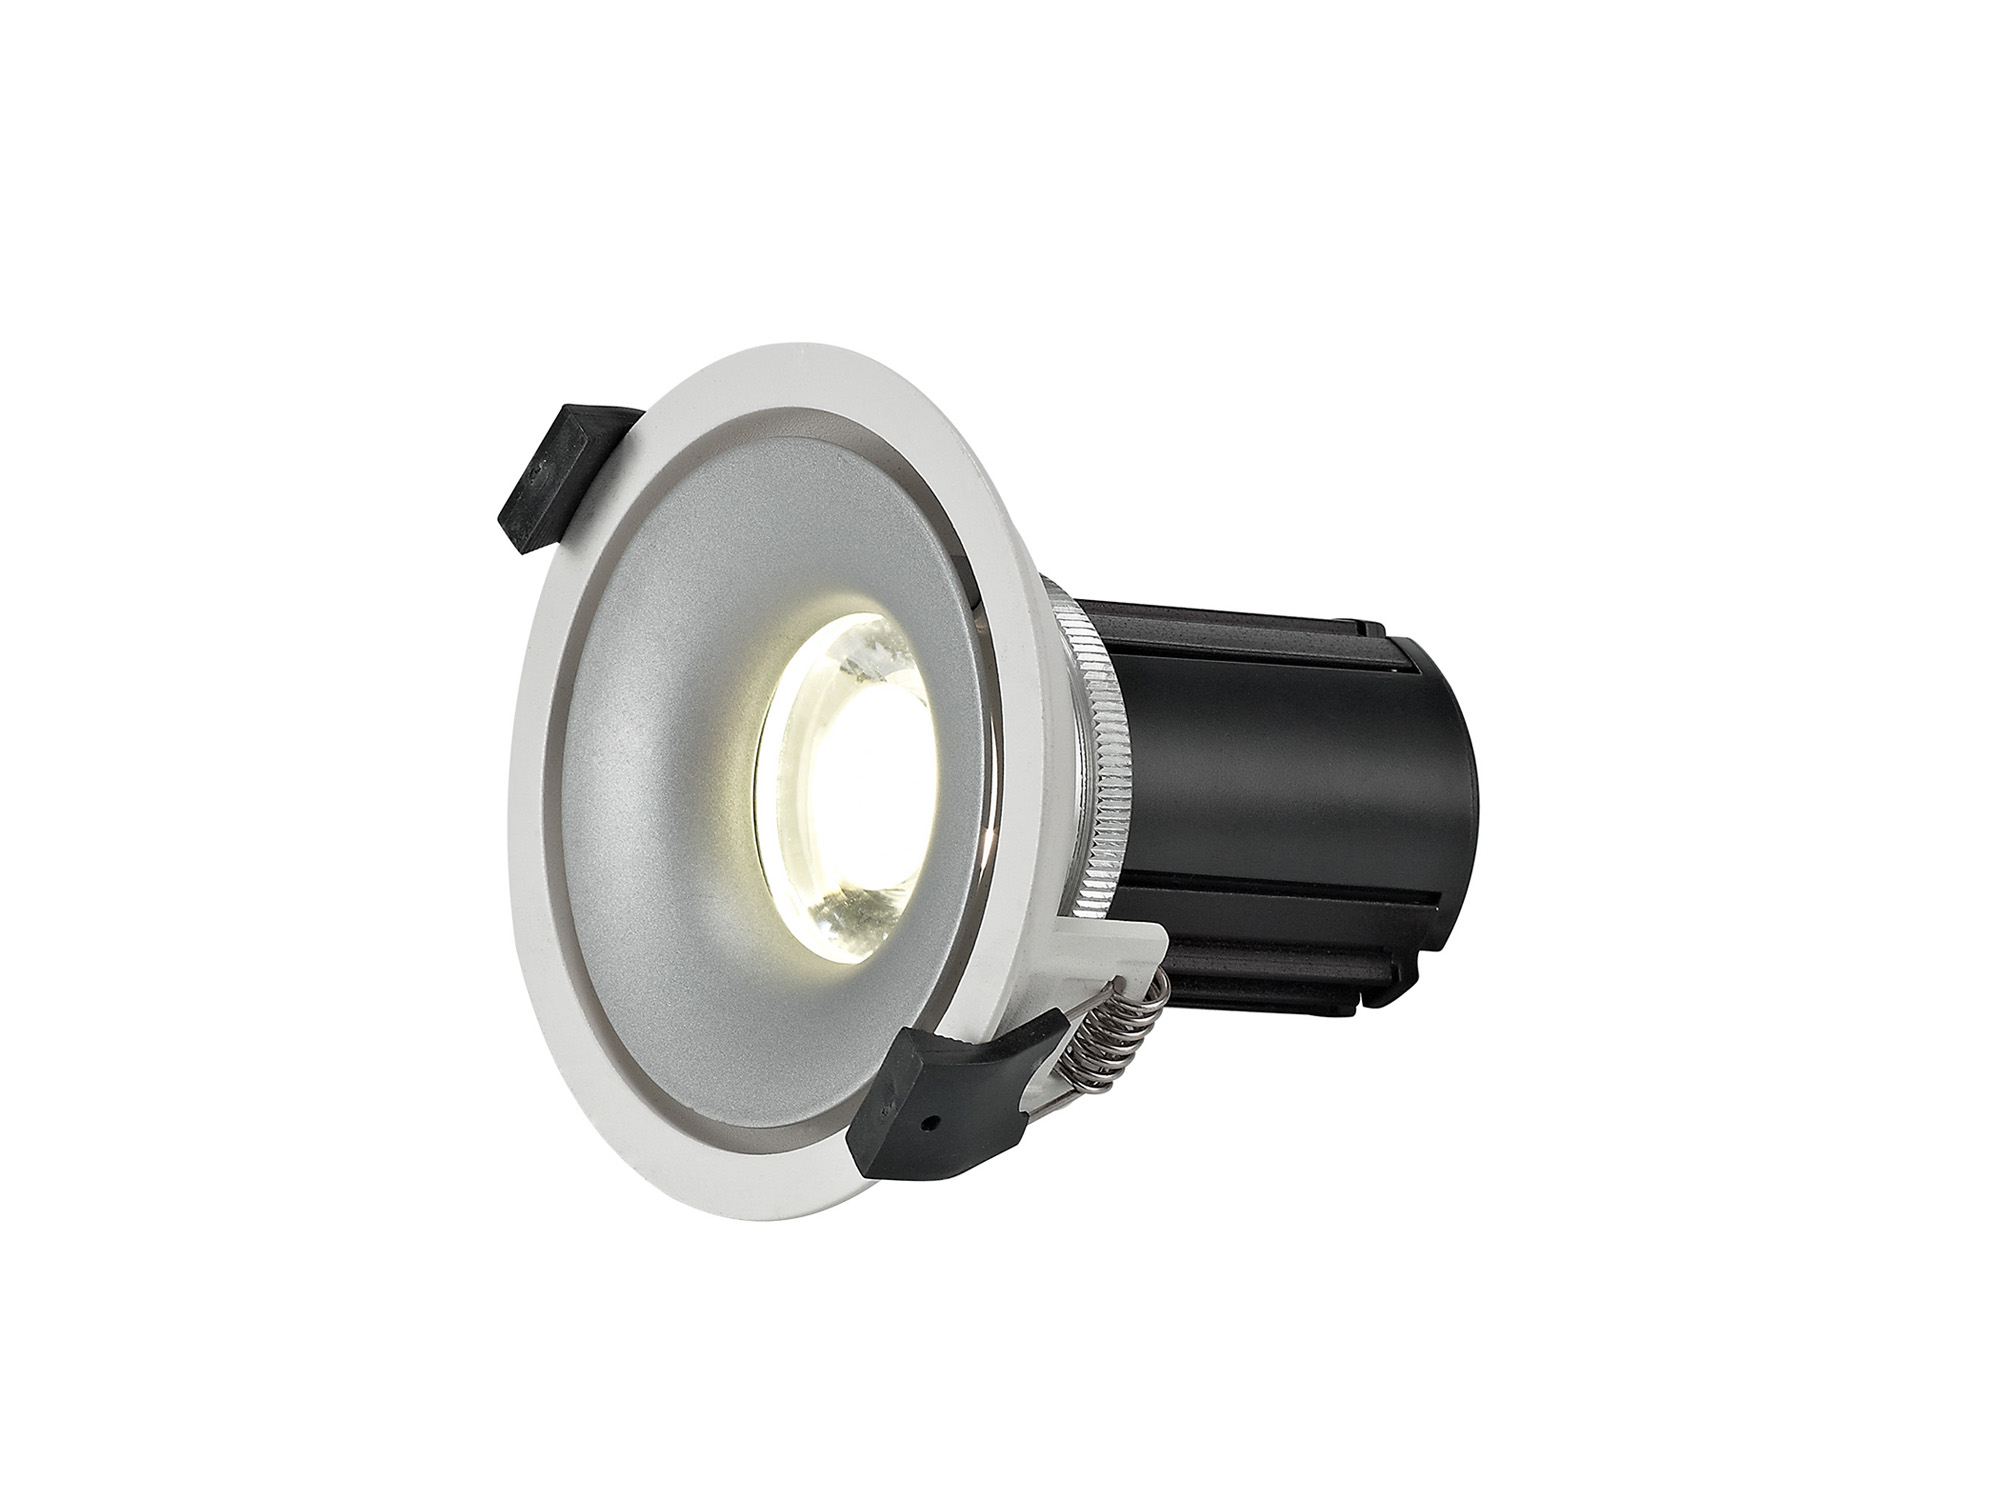 DM201042  Bolor 10 Tridonic Powered 10W 4000K 810lm 36° CRI>90 LED Engine White/Silver Fixed Recessed Spotlight; IP20